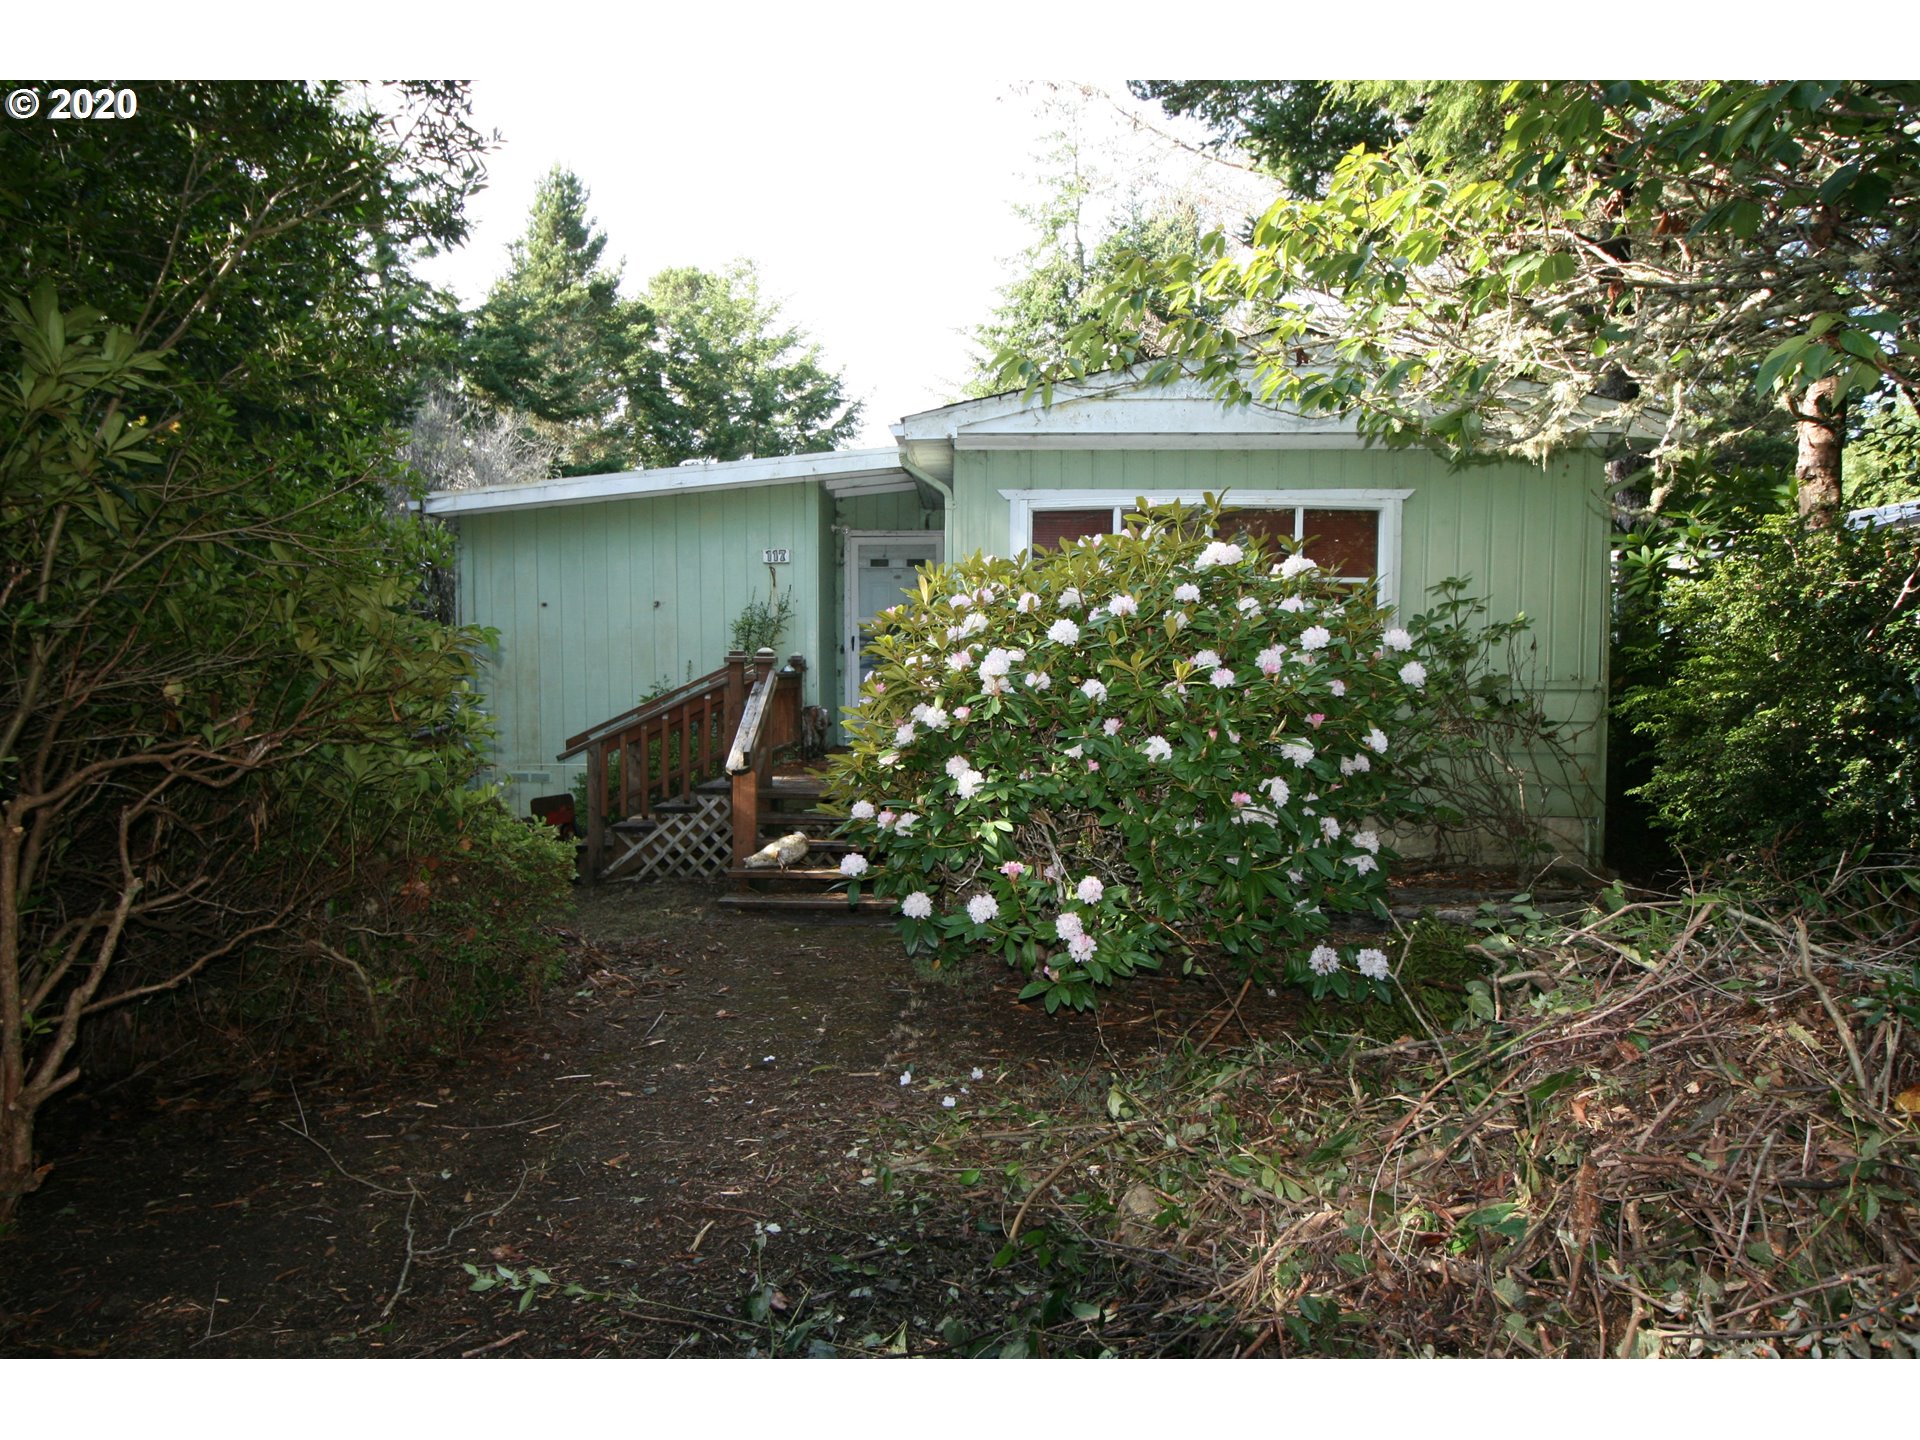 1600 RHODODENDRON DR 117 (1 of 1)